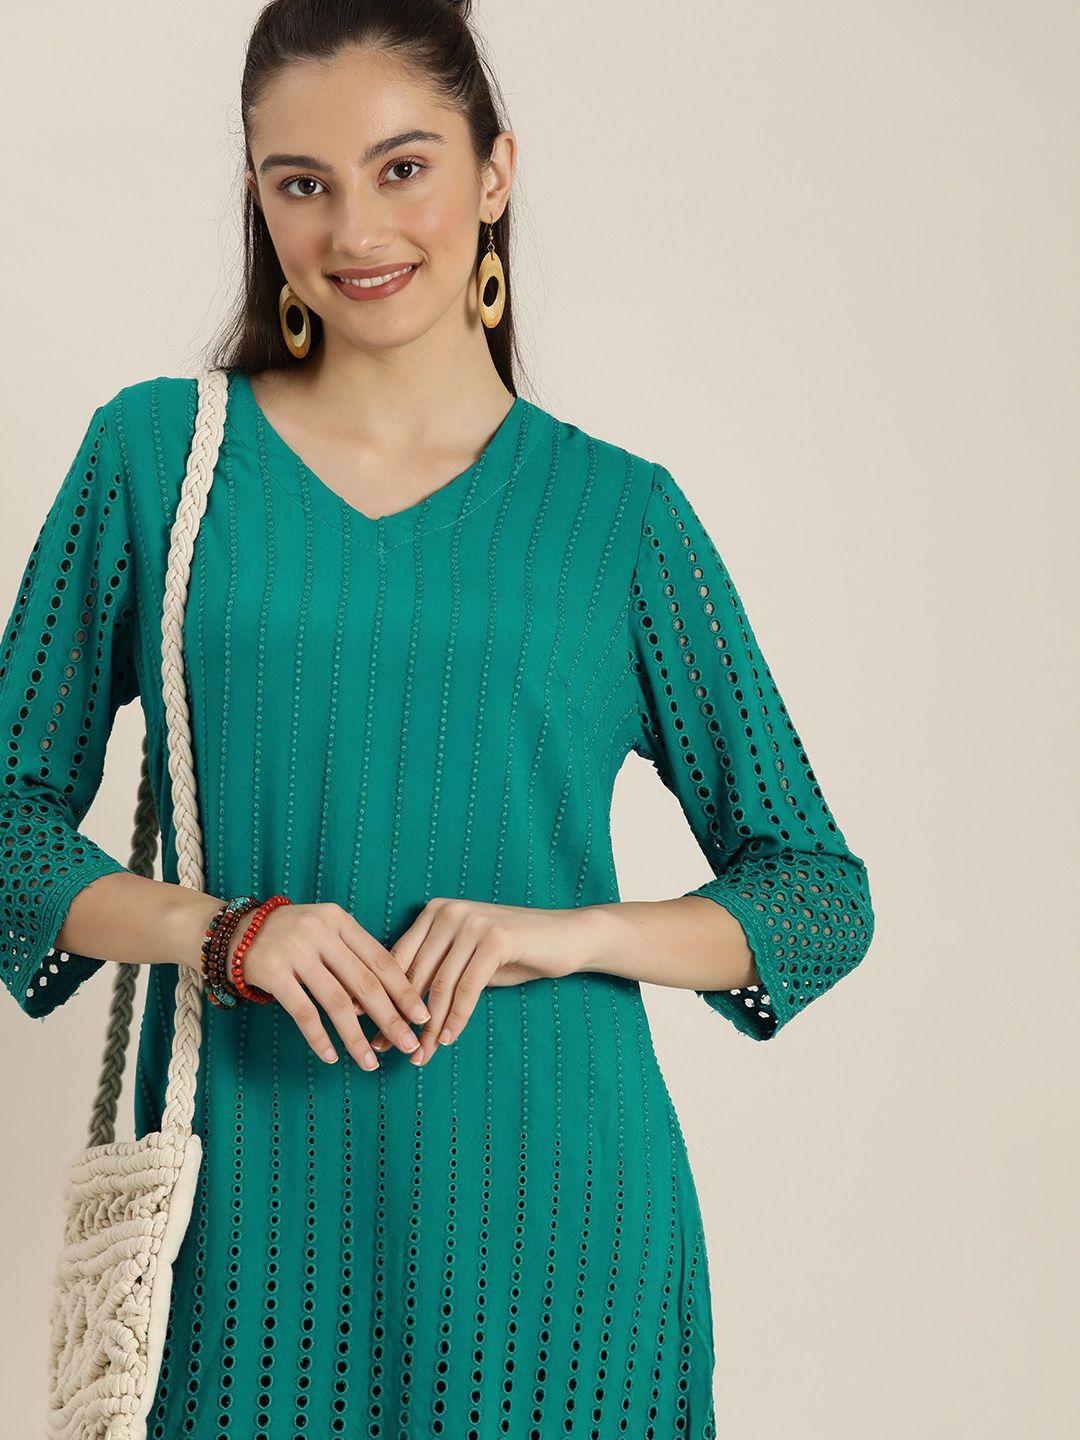 sangria-teal-embroidered-ethnic-a-line-dress